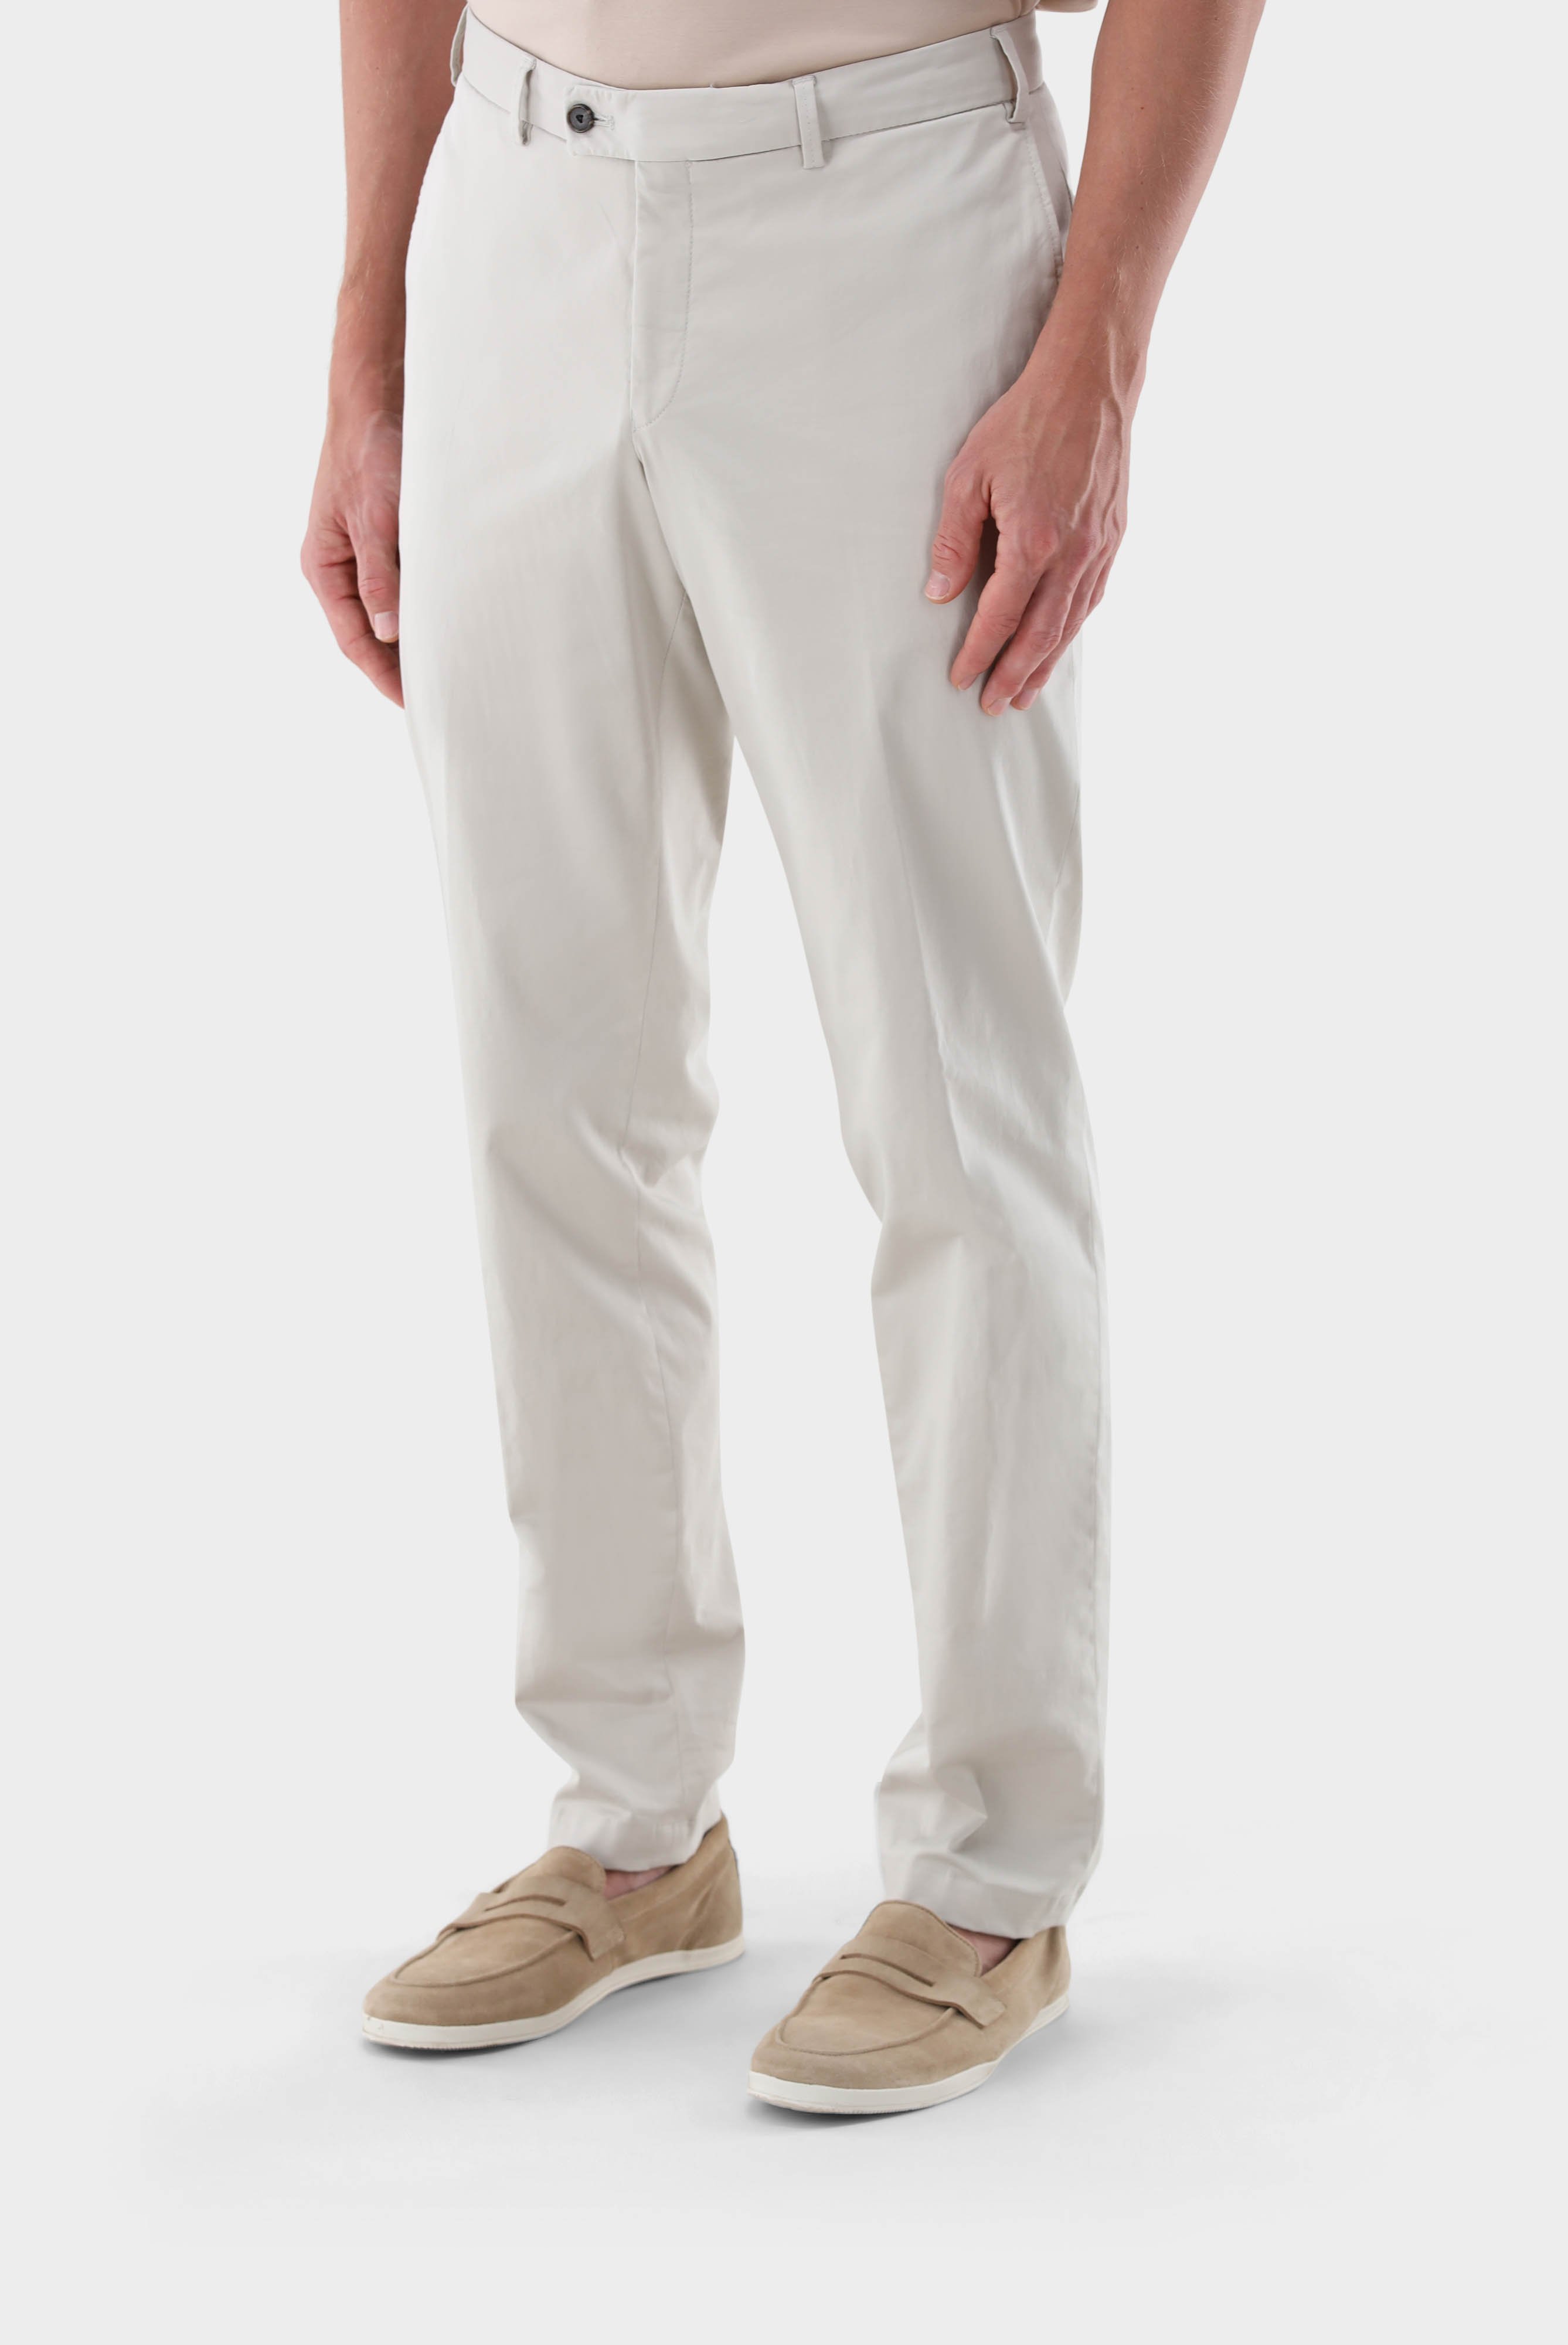 Jeans & Trousers+Cotton with Stretch Tapered Chinos+80.7858..J00151.110.50